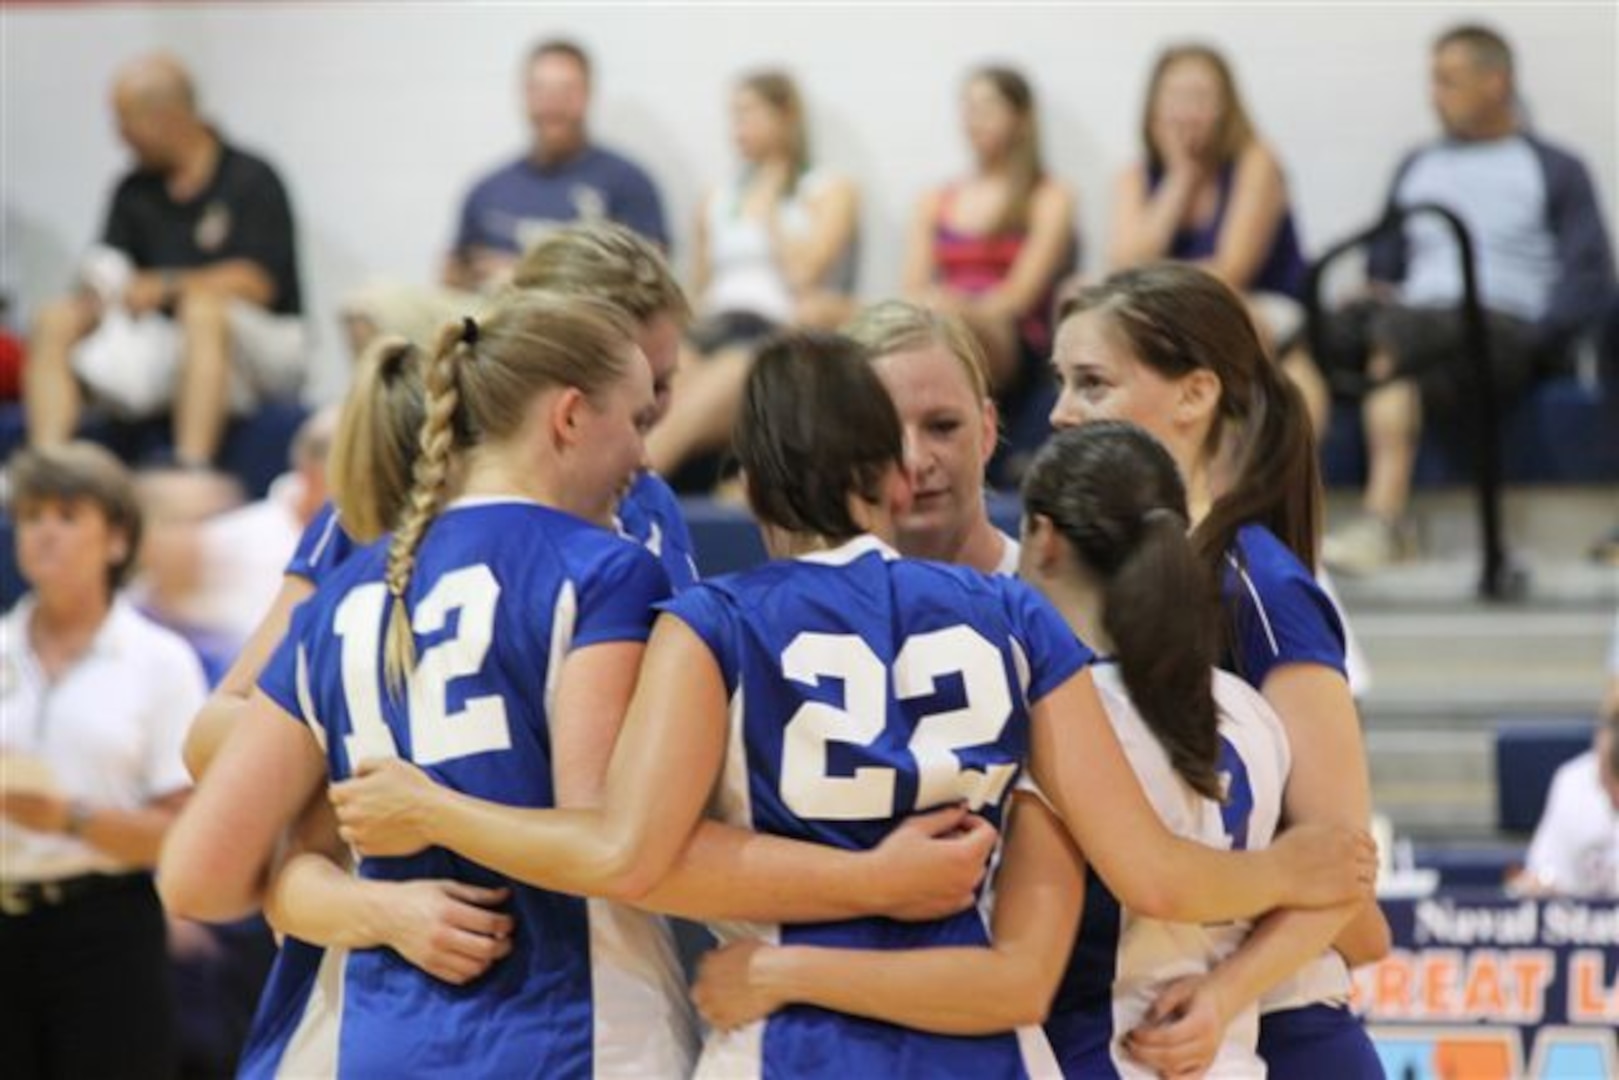 Members of the 2012 All-Air Force Womens Volleyball team huddle up before match play.